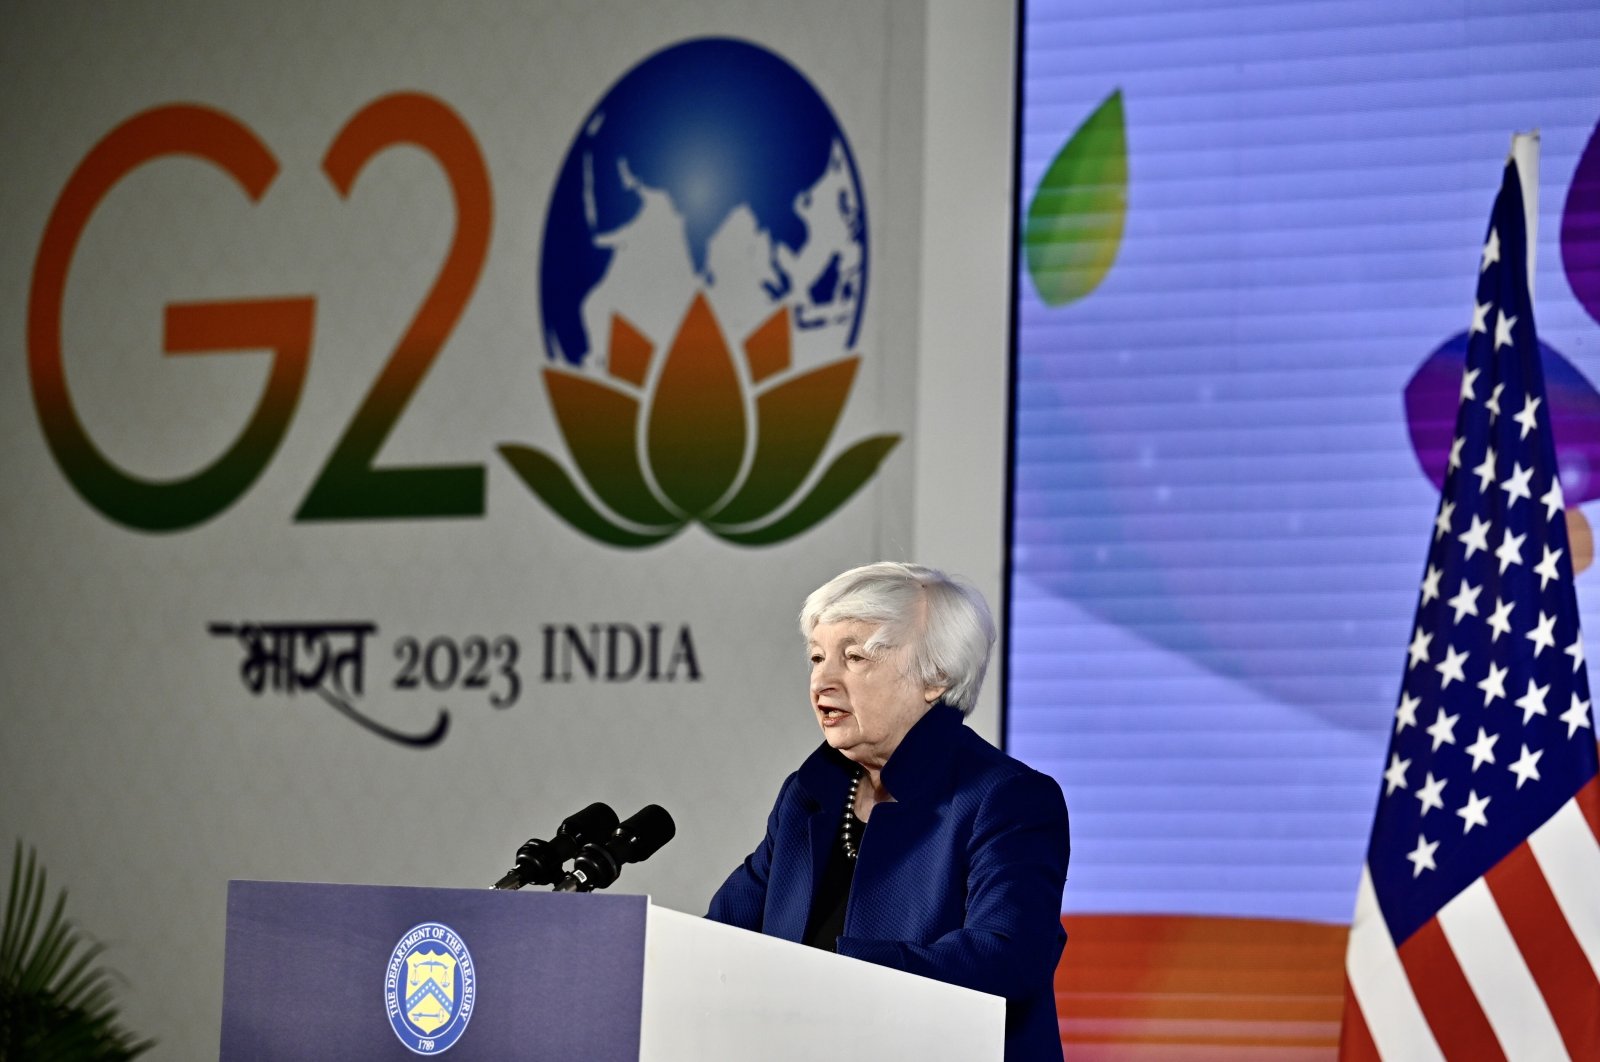 United States Secretary of the Treasury Janet Yellen addresses a news conference during the G-20 Finance Ministers and Central Bank Governors (FMCBG) meeting in Bangalore, India, Feb. 23, 2023. (EPA Photo)